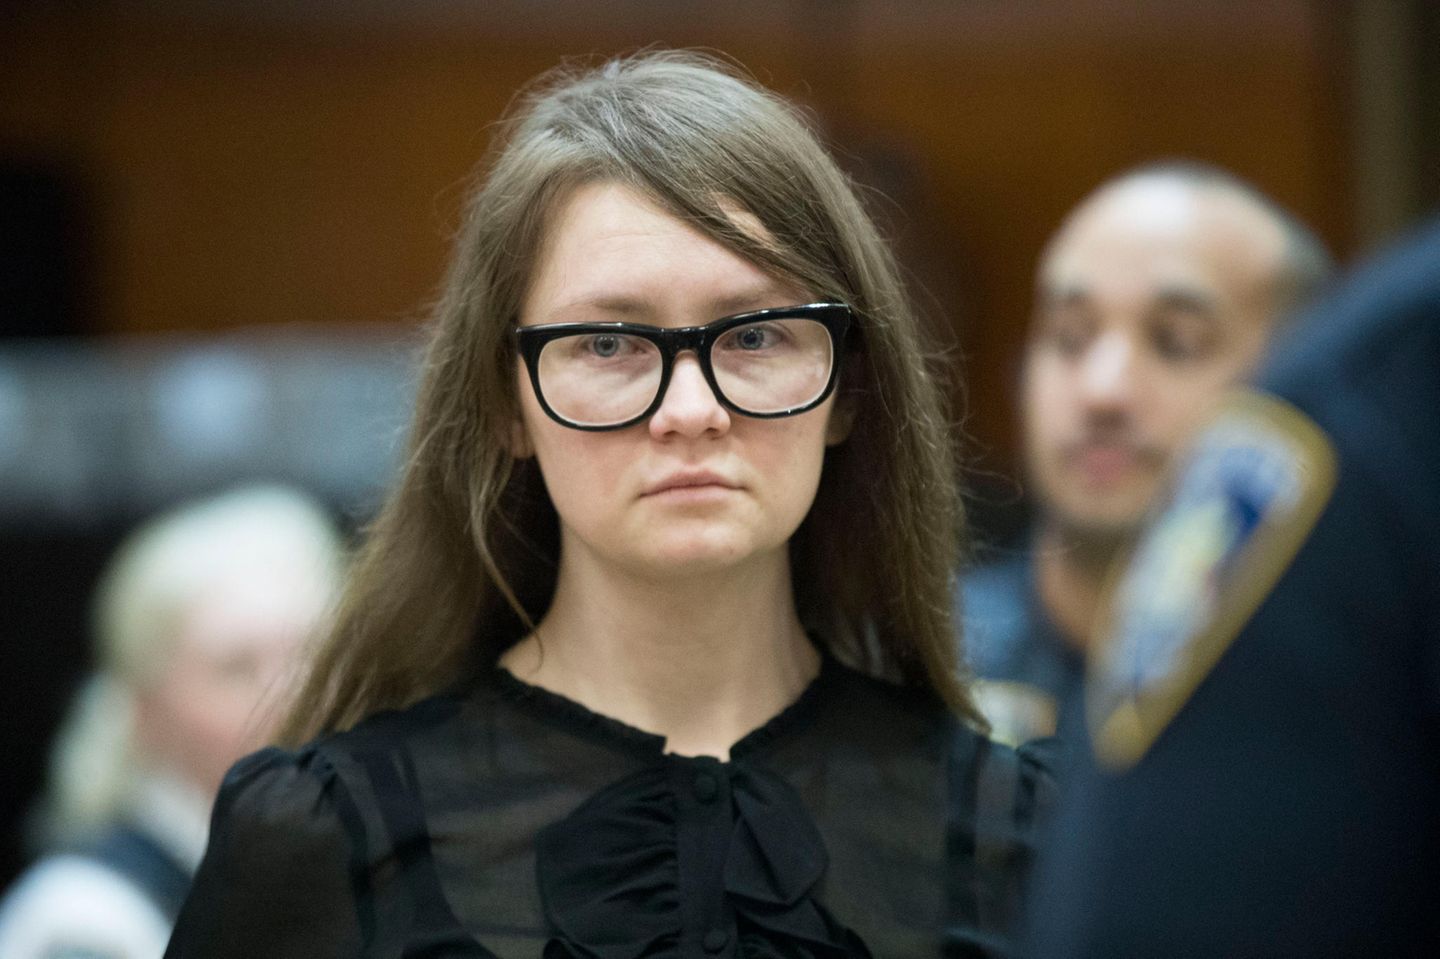 FILE - In this April 25, 2019, file photo, Anna Sorokin, who claimed to be a German heiress, returns to the courtroom during her trial on grand larceny and theft of services charges in New York.    A state website shows that Sorokin was freed into pa